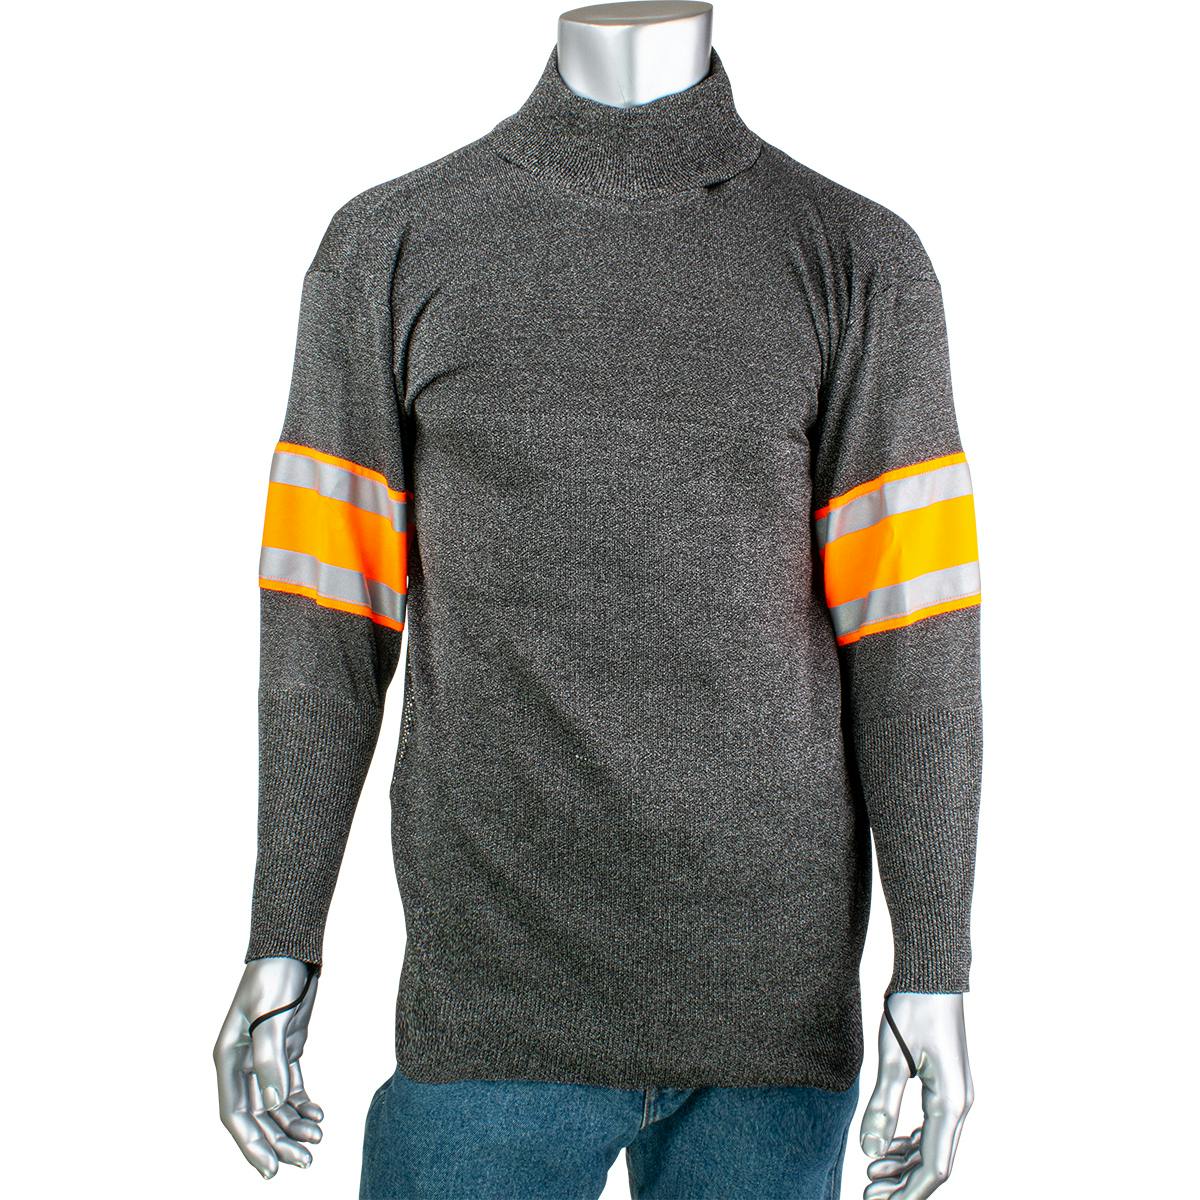 ATA® Blended Cut Resistant Pullover with Hi-Vis / Reflective Taped Sleeves and Thumb Loops, Dark Gray (P145SP-3CM-HV2-TL)_1